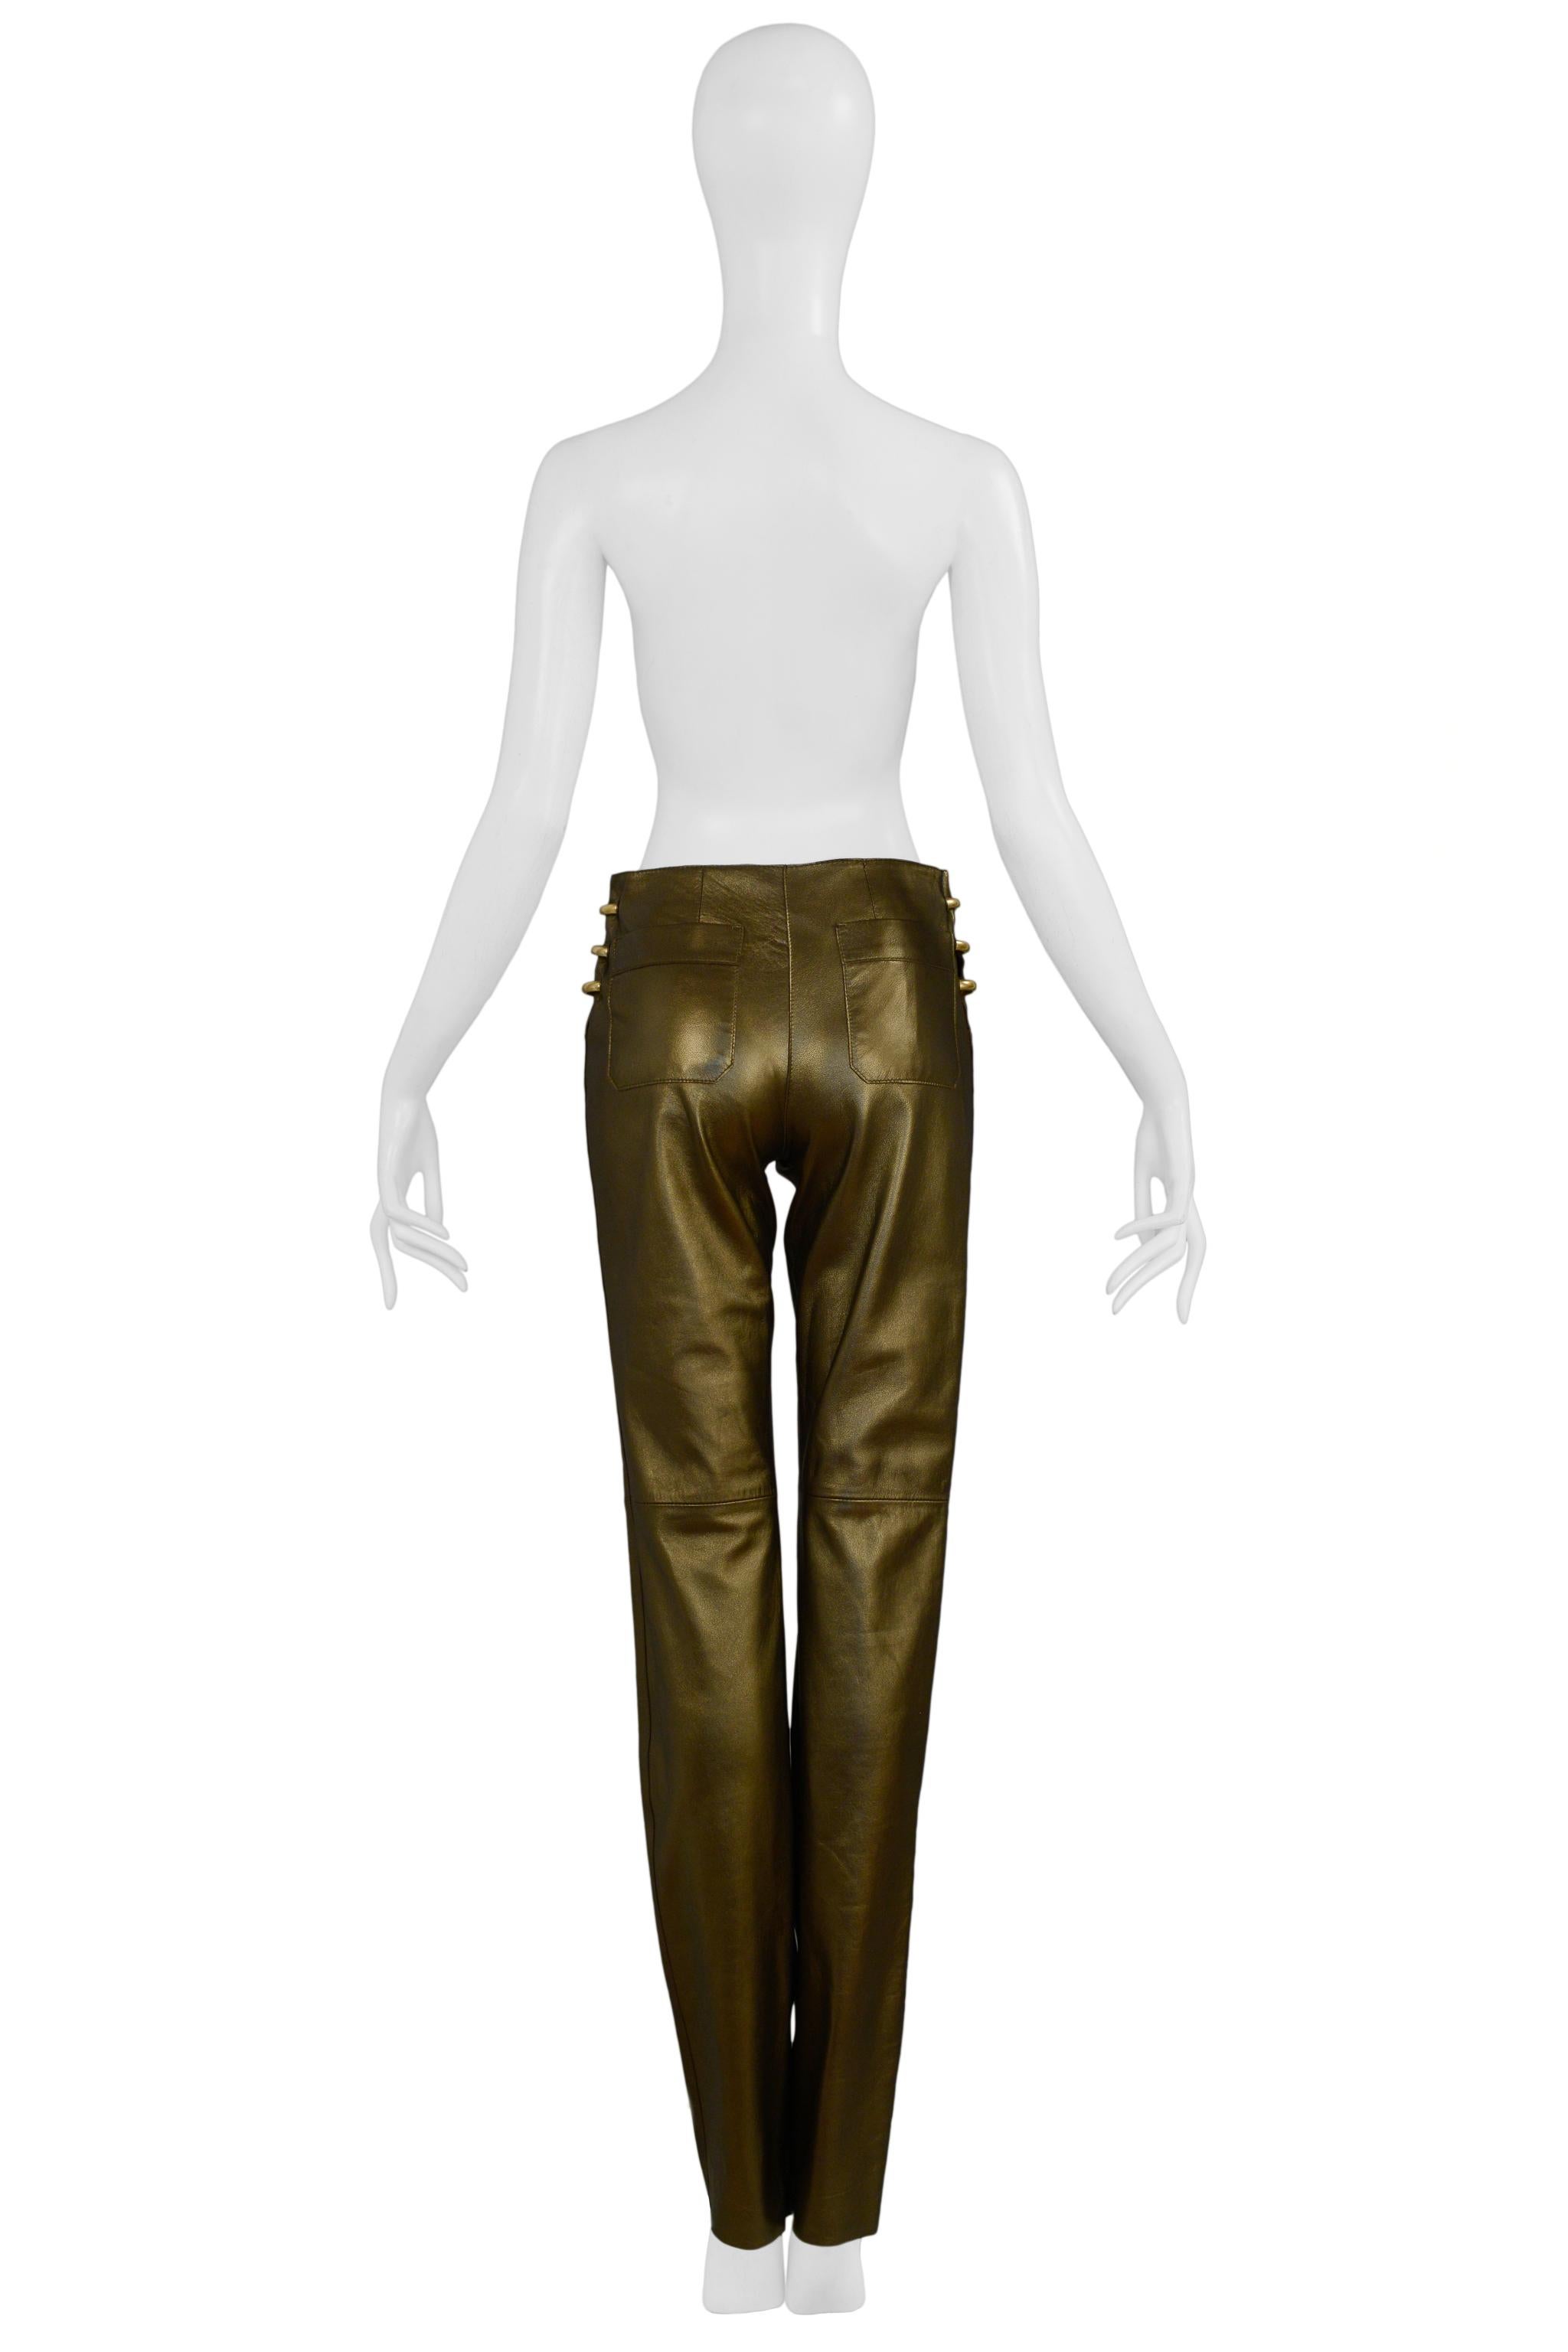 Gianfranco Ferre Bronze Leather Pants 1997 In Excellent Condition For Sale In Los Angeles, CA